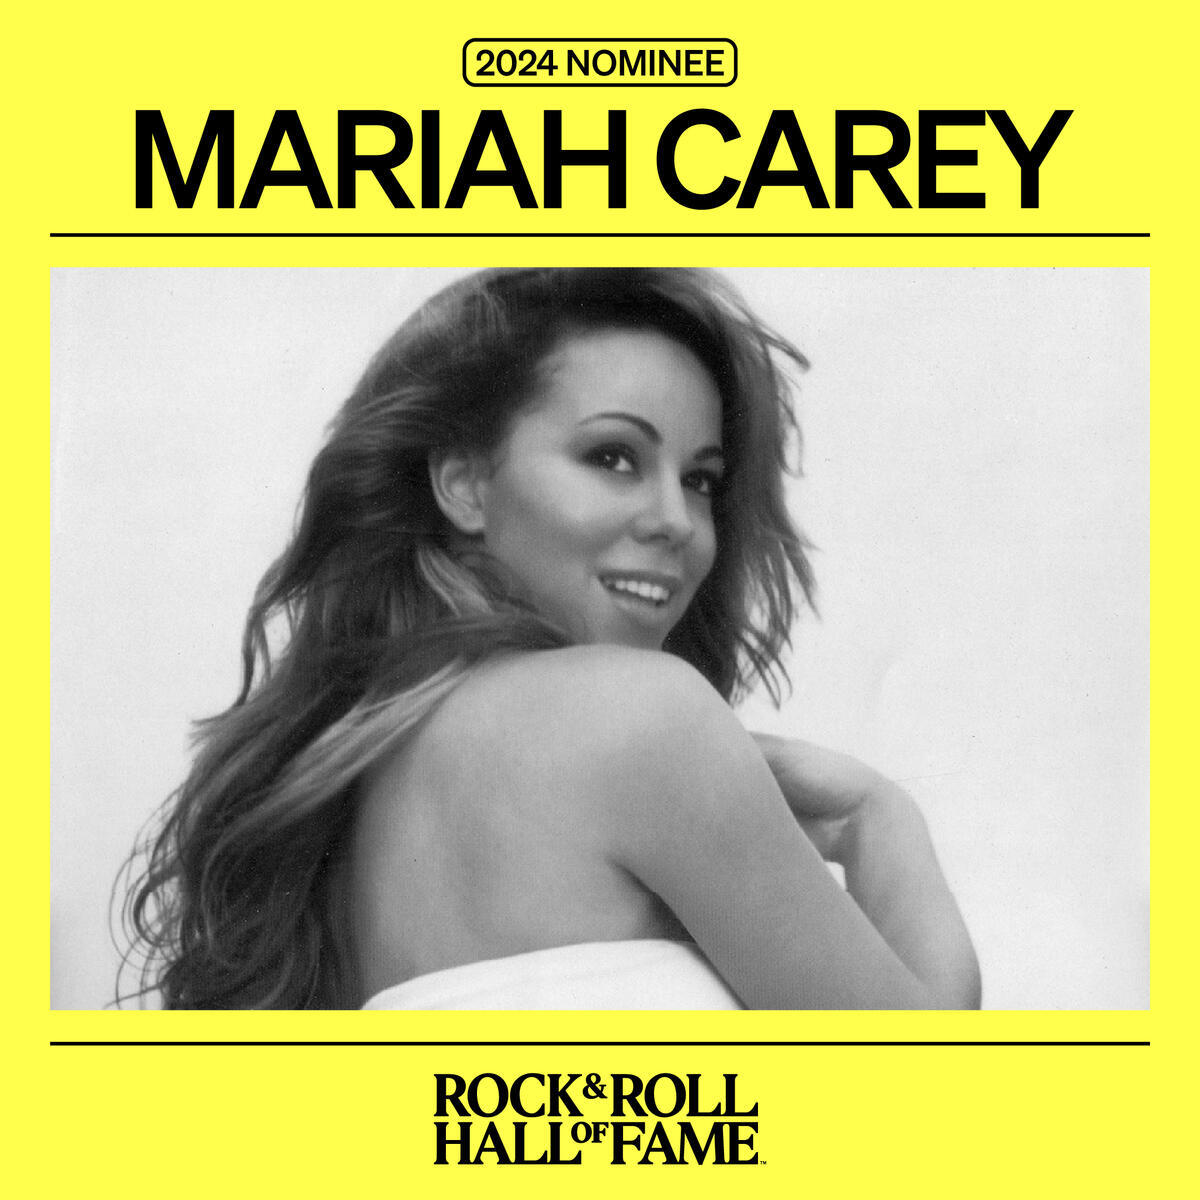 Only a few days left to show love and support to @MariahCarey in the #RockHall2024 'fan ballot'. Let's goooooooo !!! vote.rockhall.com